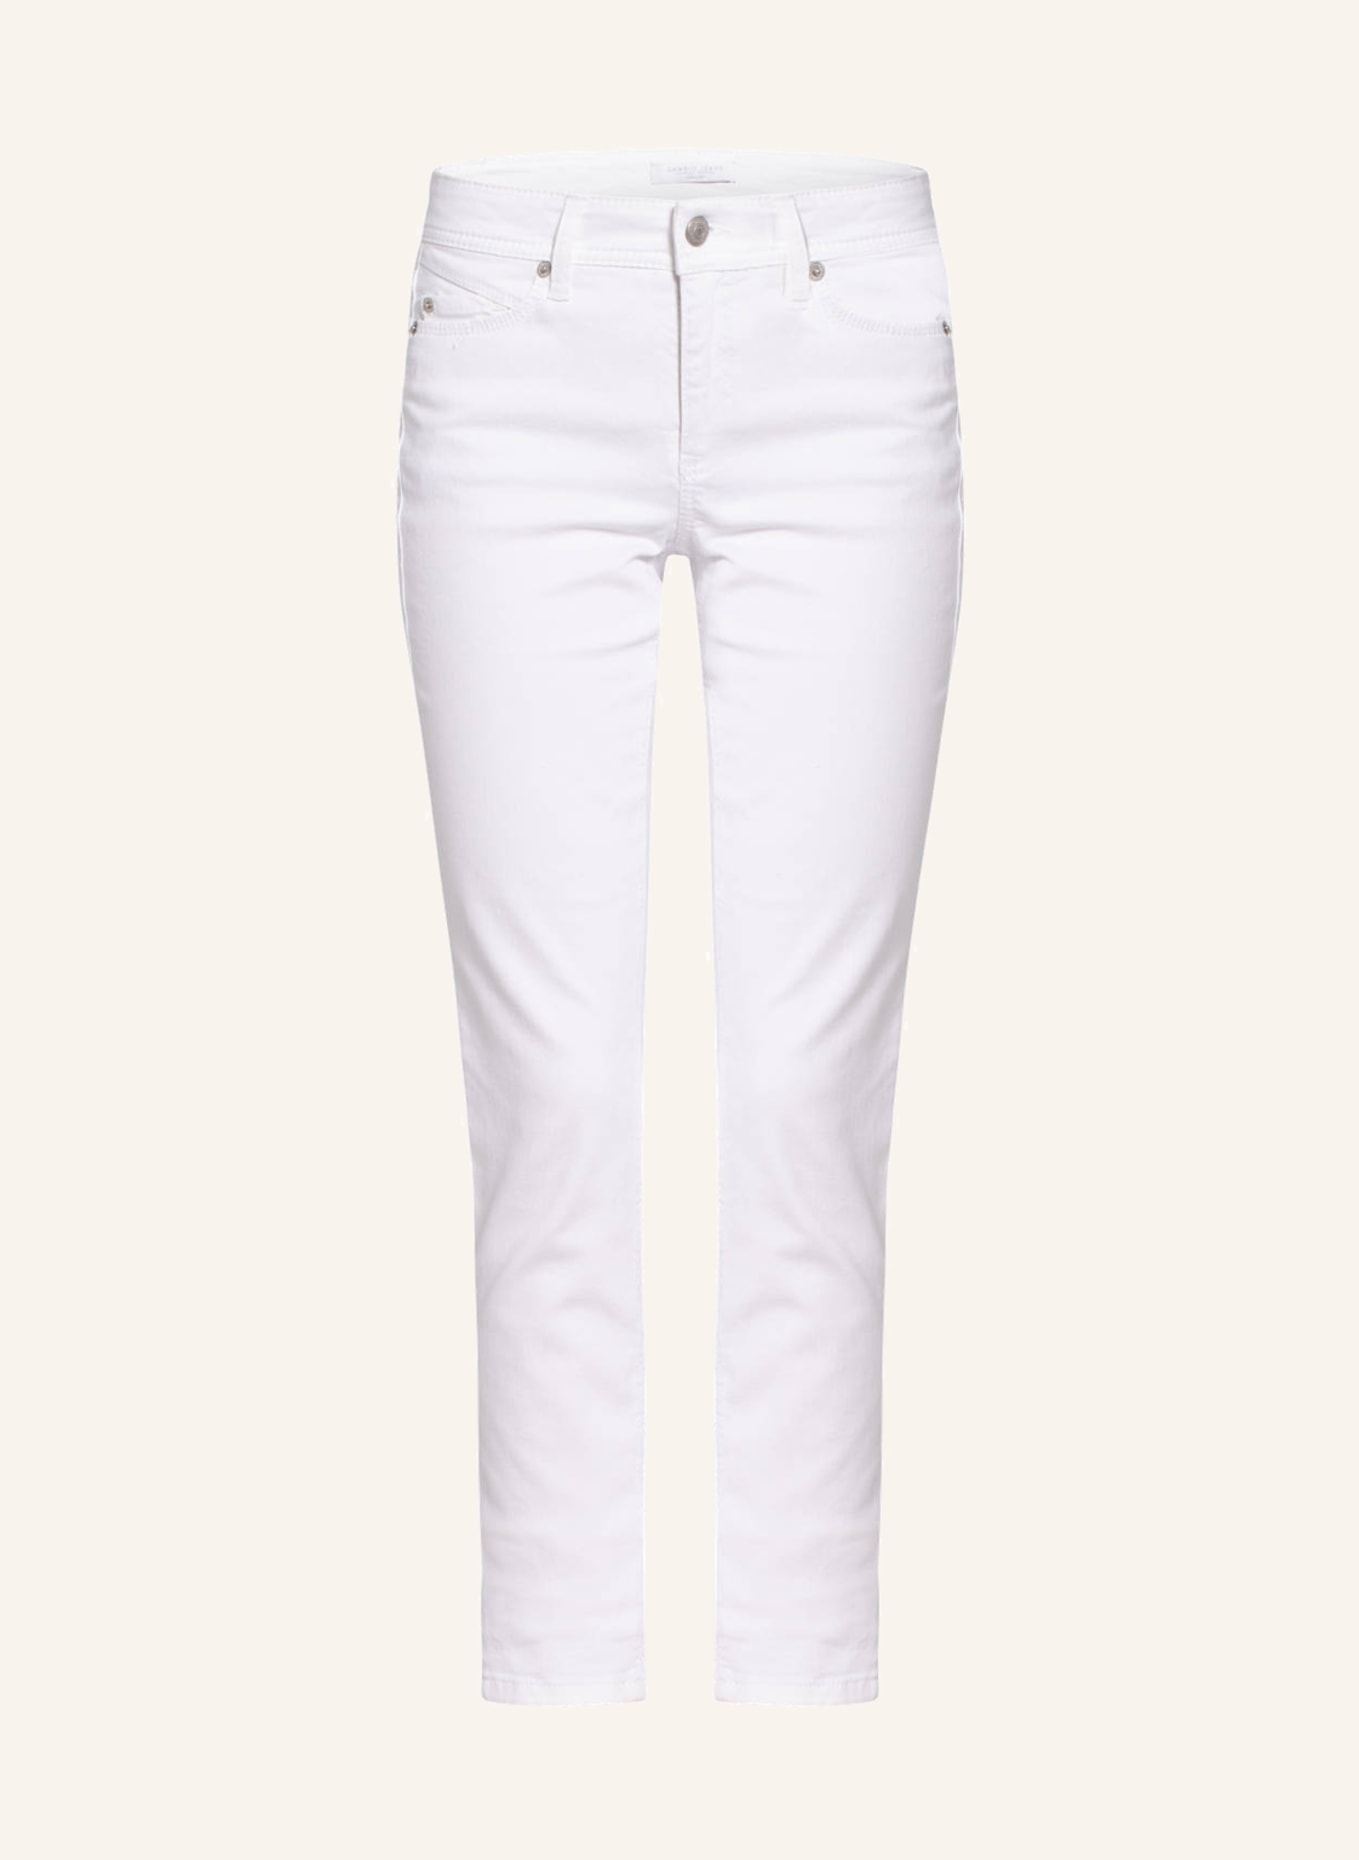 CAMBIO Jeans PARLA, Color: 5002 WEISS (Image 1)